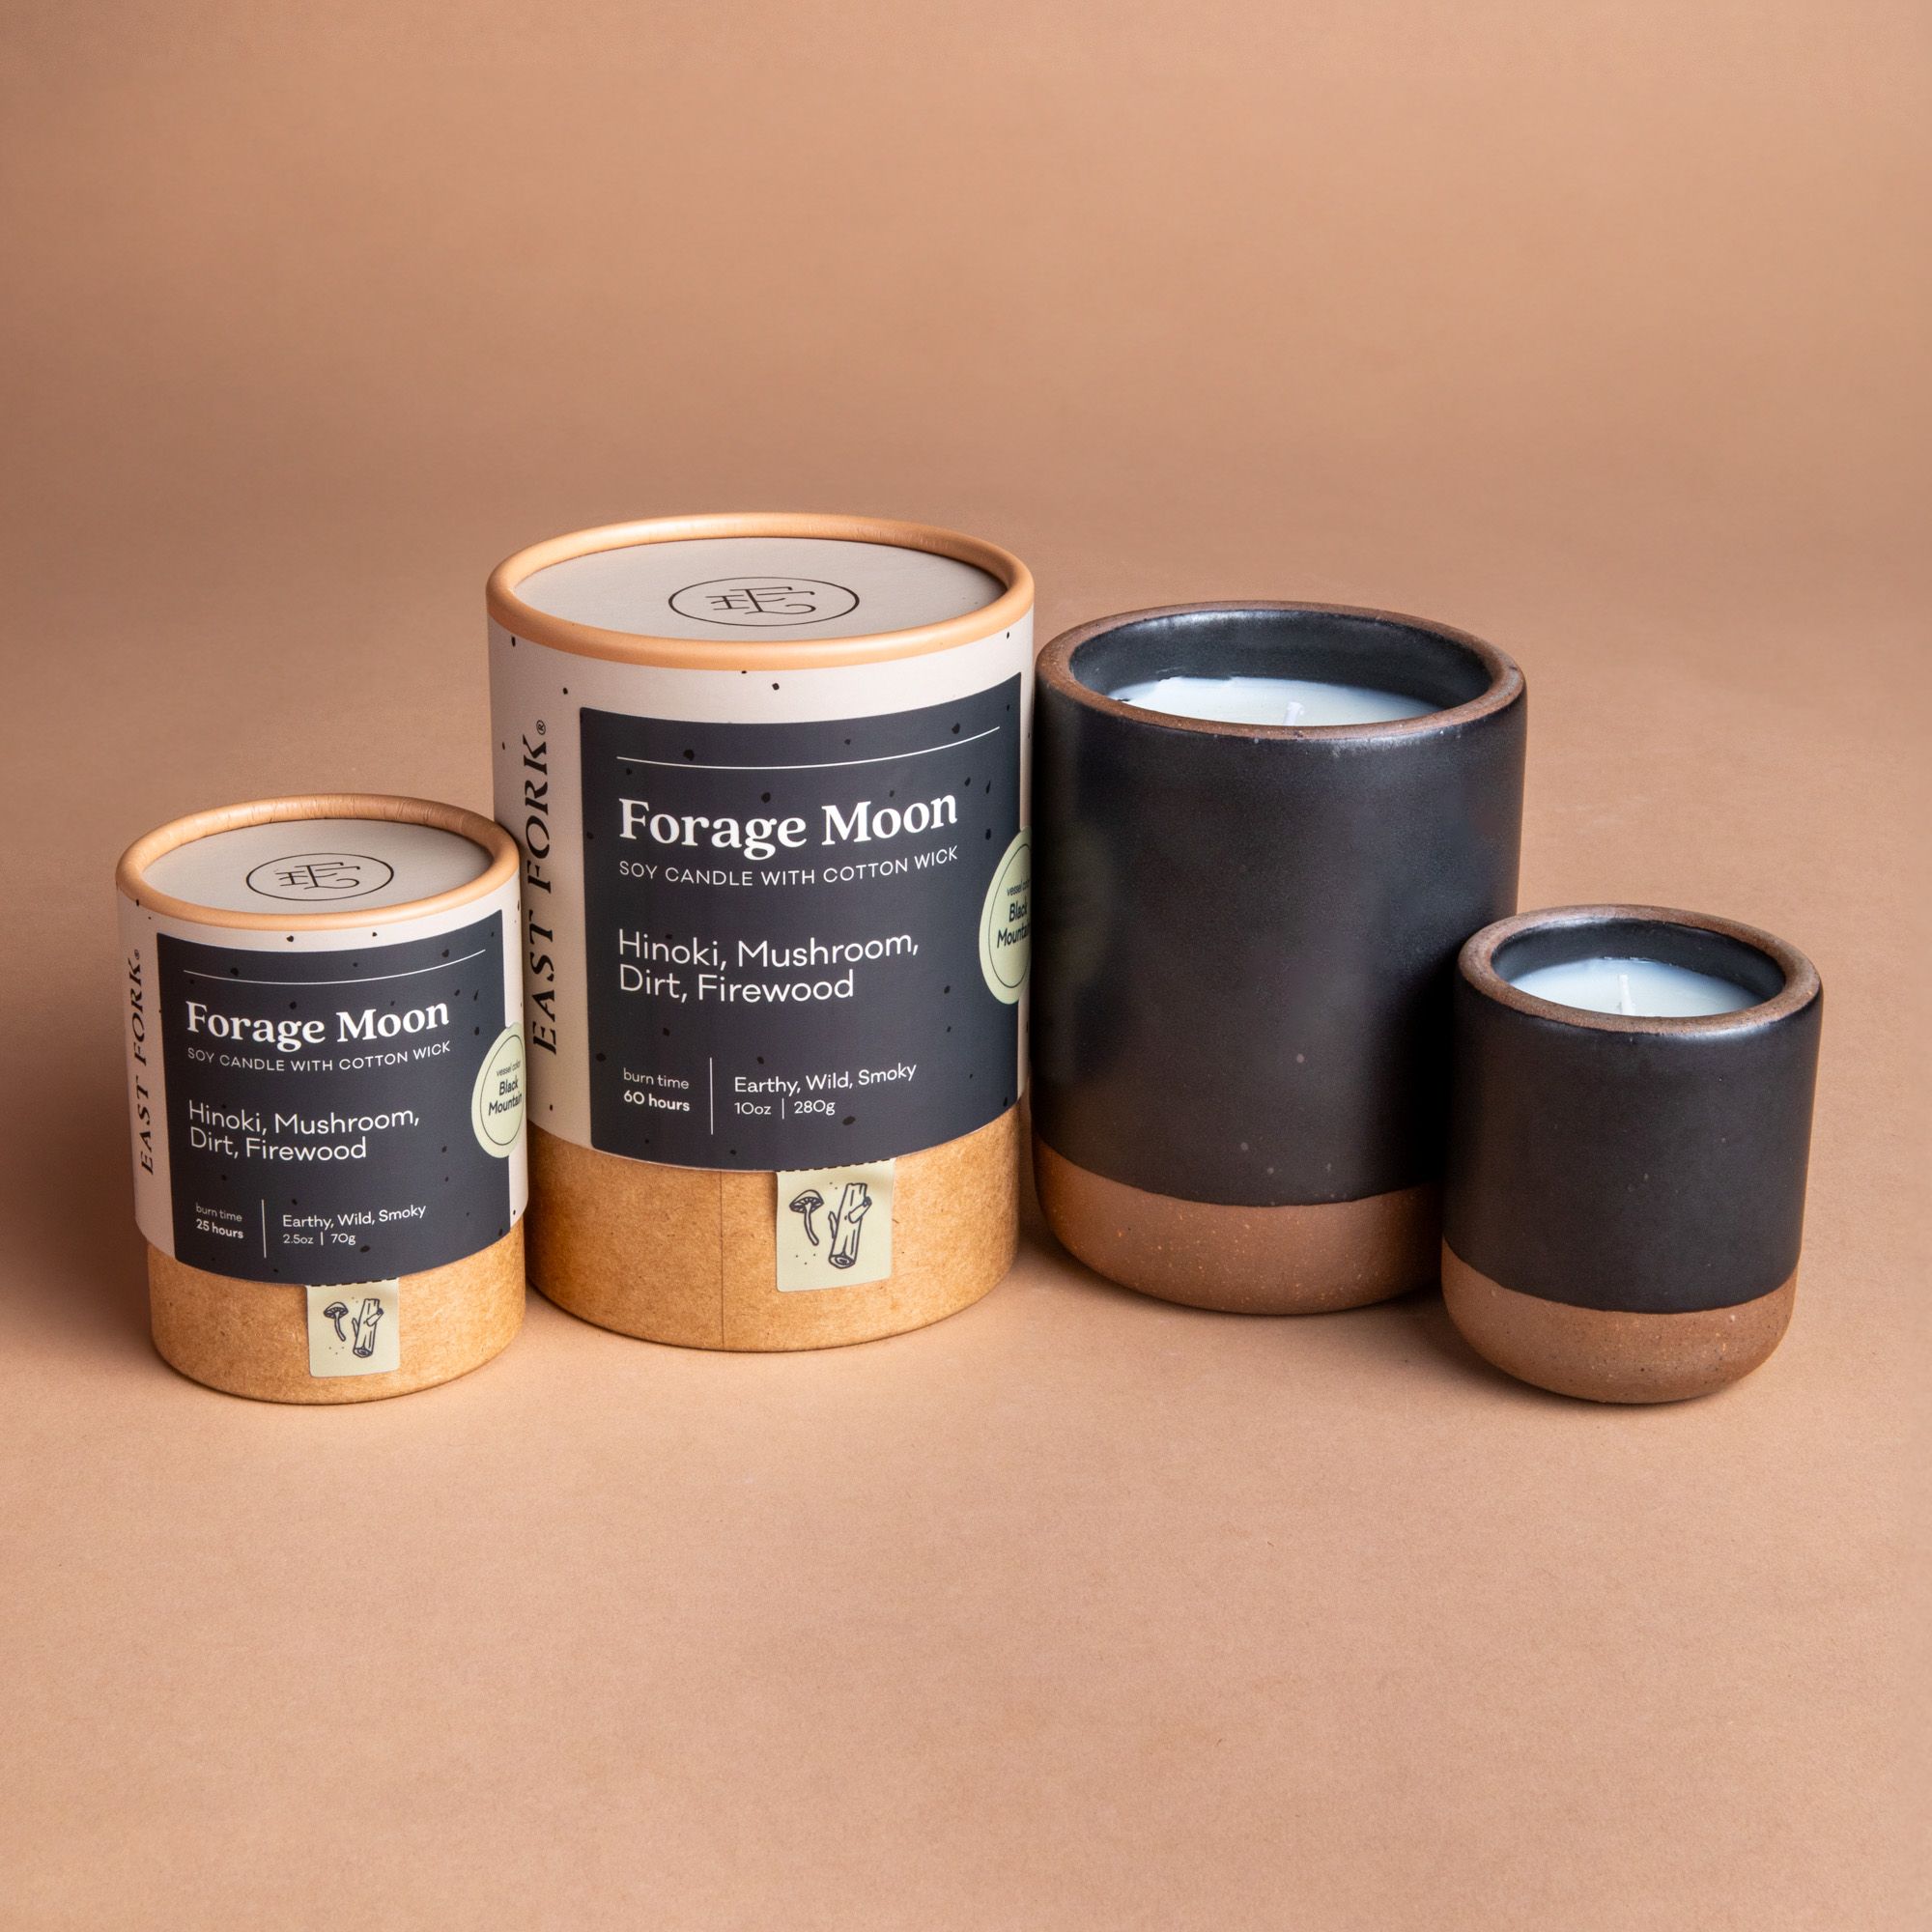 Small and large ceramic vessel next to each other in dark charcoal color with candles inside each. Cardboard tube packaging is on the left with branding stickers that say "Forage Moon".